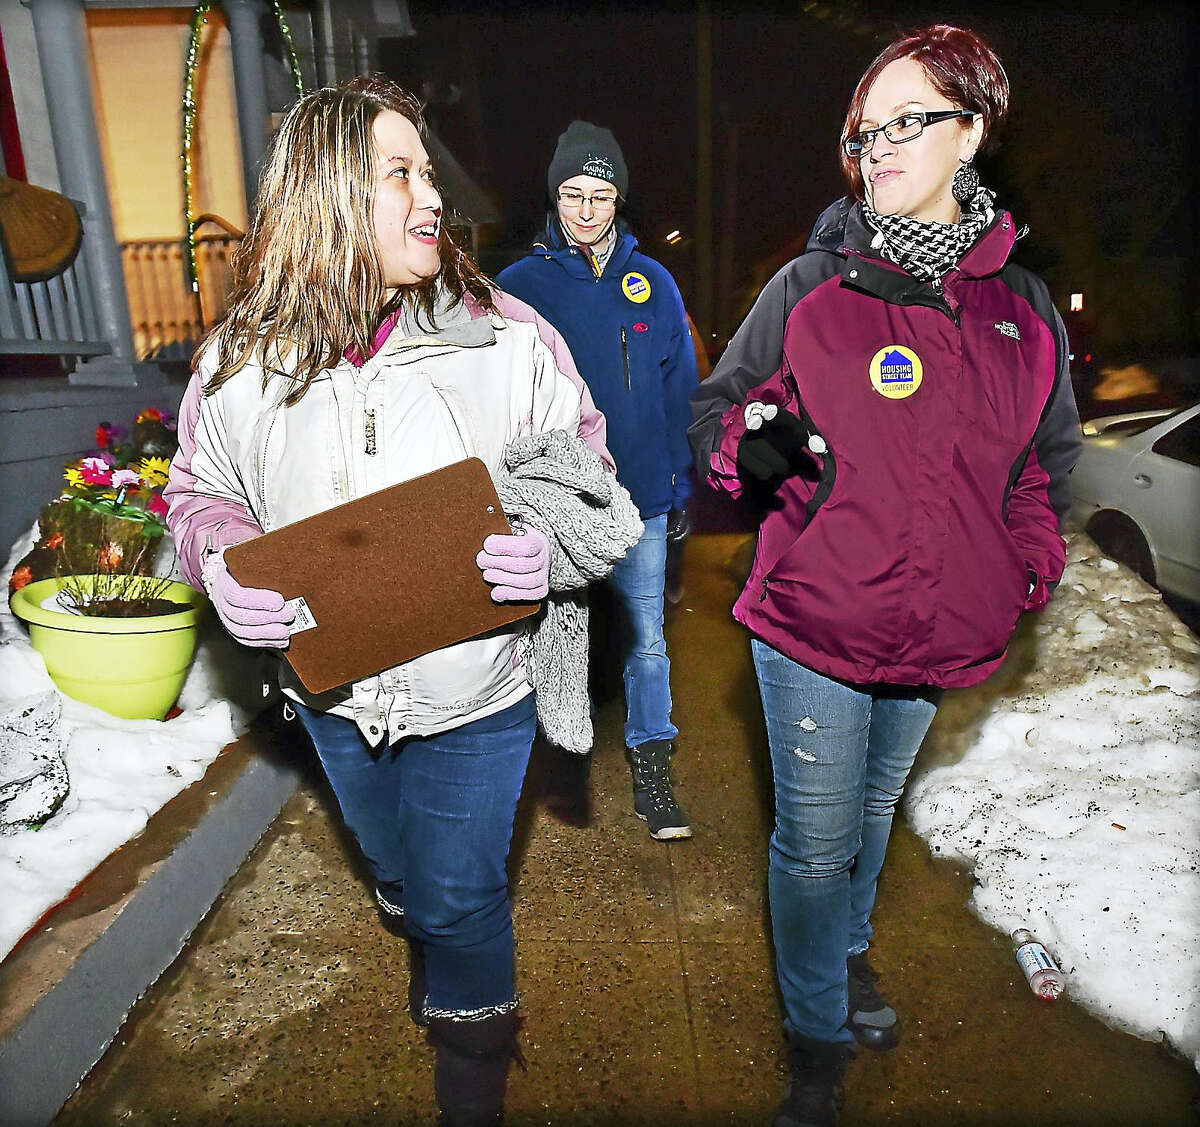 Team leader Veronica Cruz, left, talks to Derby resident Jennifer Olivieri, who grew up in the Fair Haven section of New Haven, as the group looks for homeless individuals during the 2016 Point-in-Time Count Tuesday.